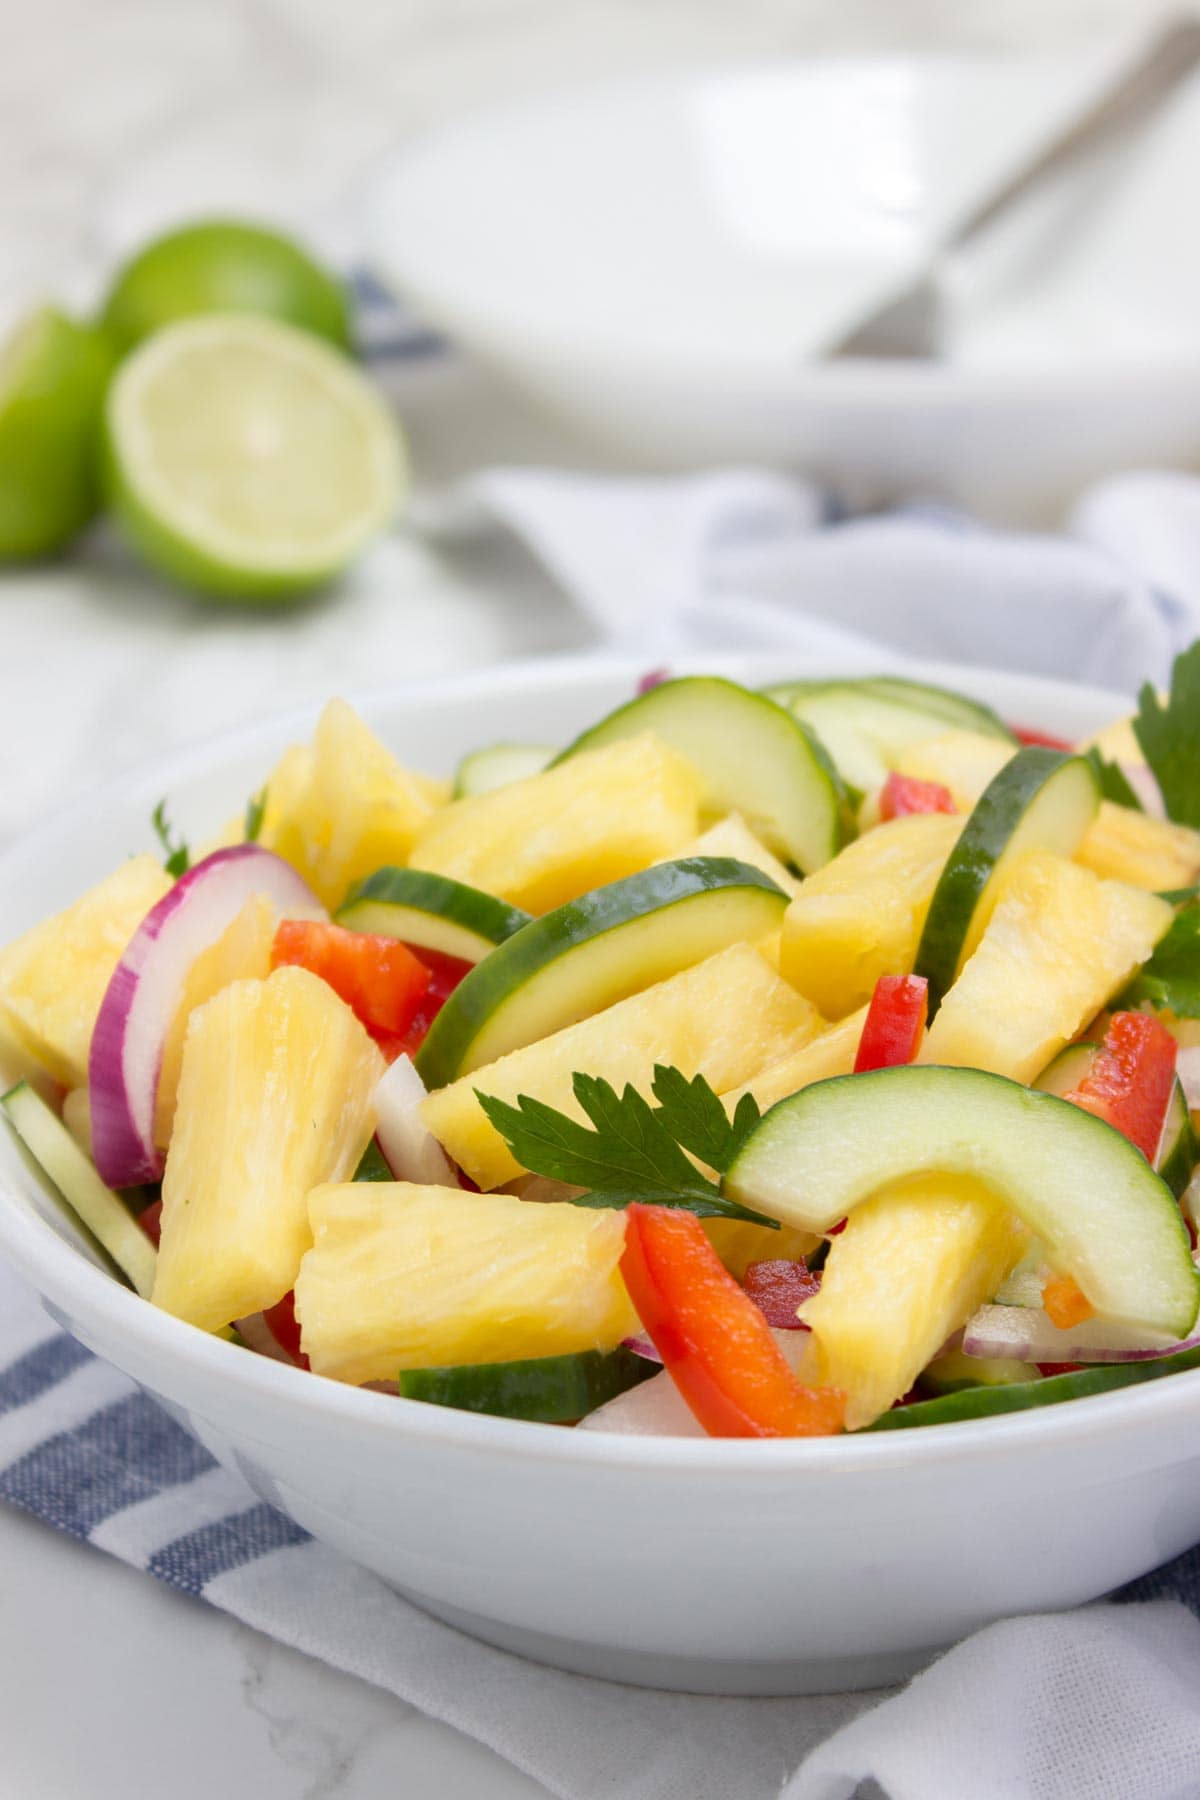 Jucy and refreshing Pineapple Cucumber Salad is a super HEALTHY way to cool down this summer! This salad is easy to make, bursting with fresh summer flavors and full of nutrients. Perfect side for summer BBQs and parties! #summer #BBQ #picnic #party #glutenfree #vegan #salad #healthy #lowcalorie #weightloss #fit #kidsfriendly | natalieshealth.com